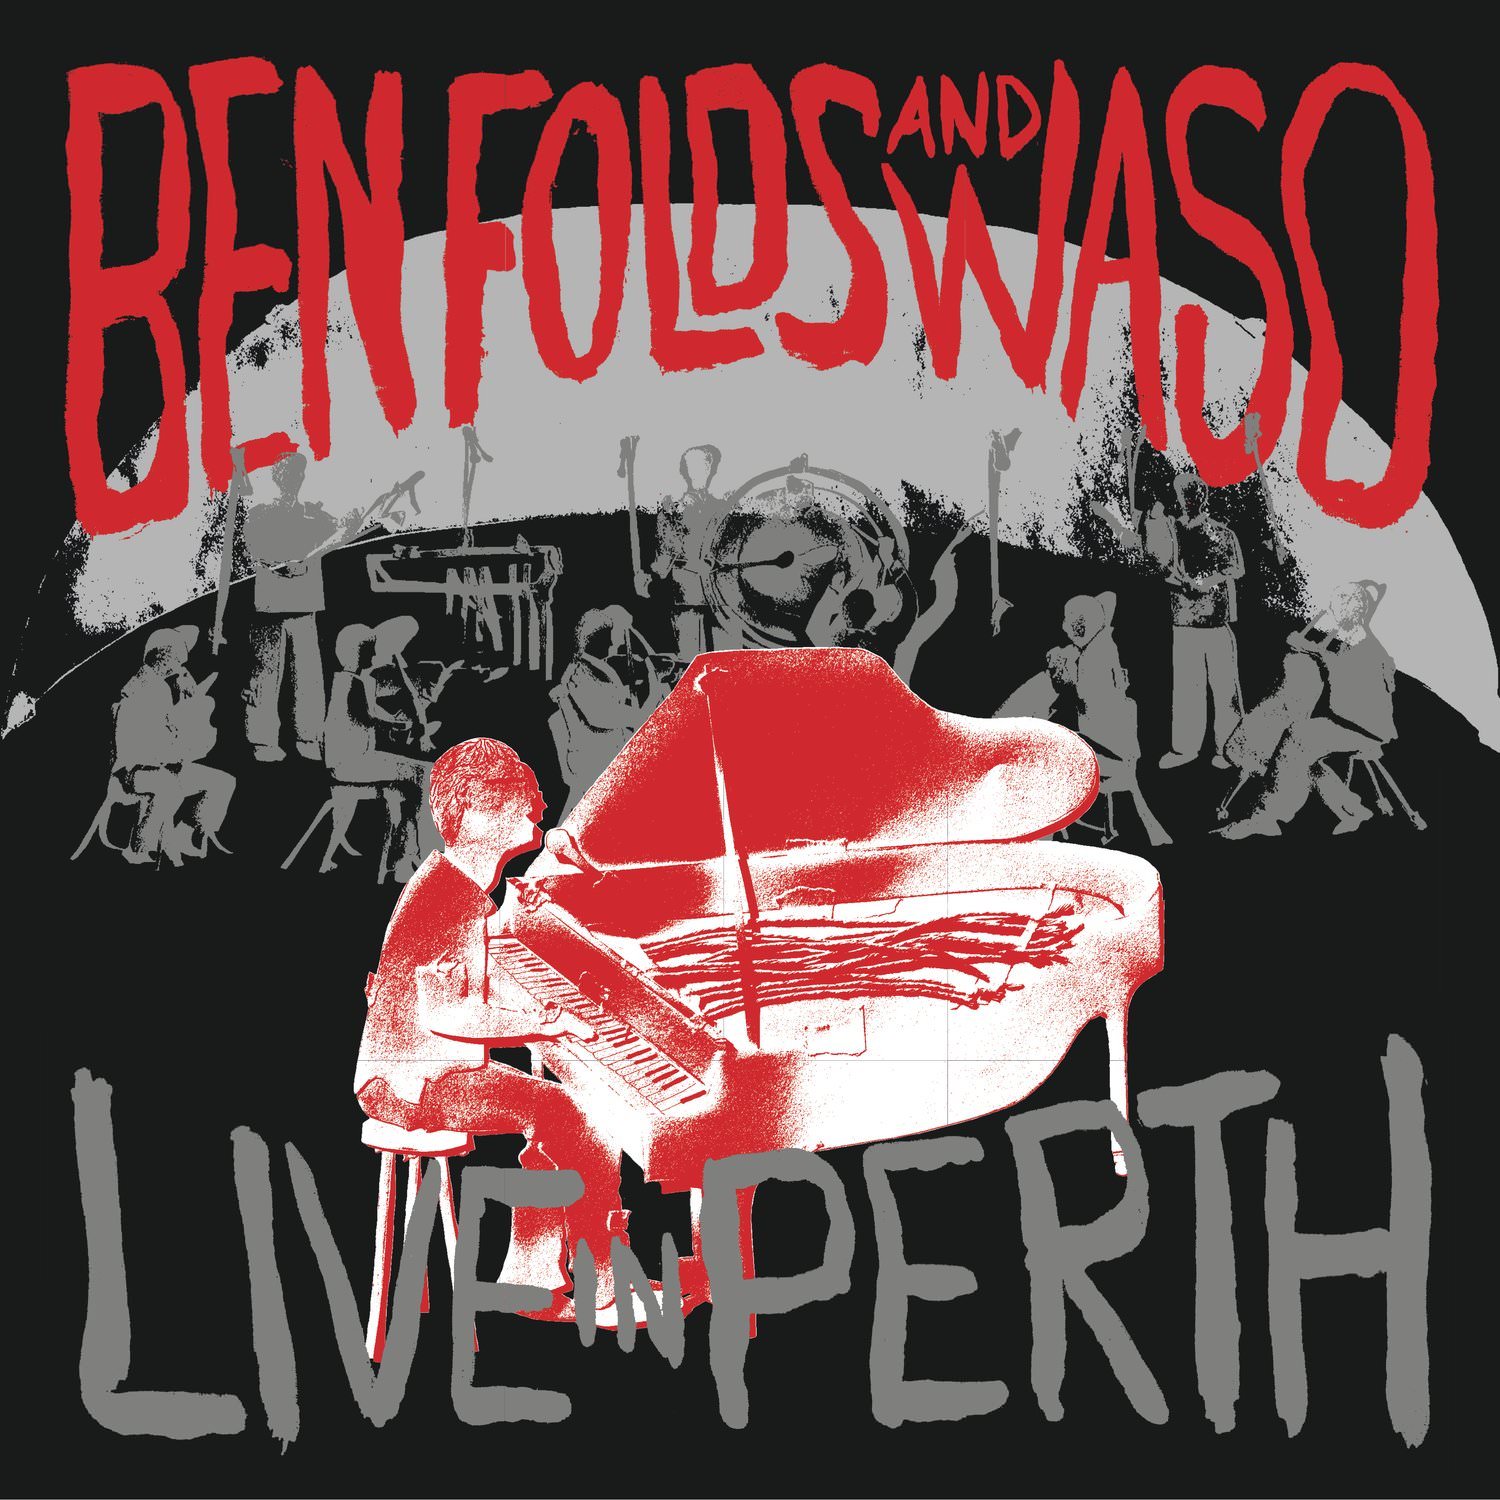 Ben Folds and WASO - Live In Perth (2017) [Qobuz FLAC 24bit/48kHz]